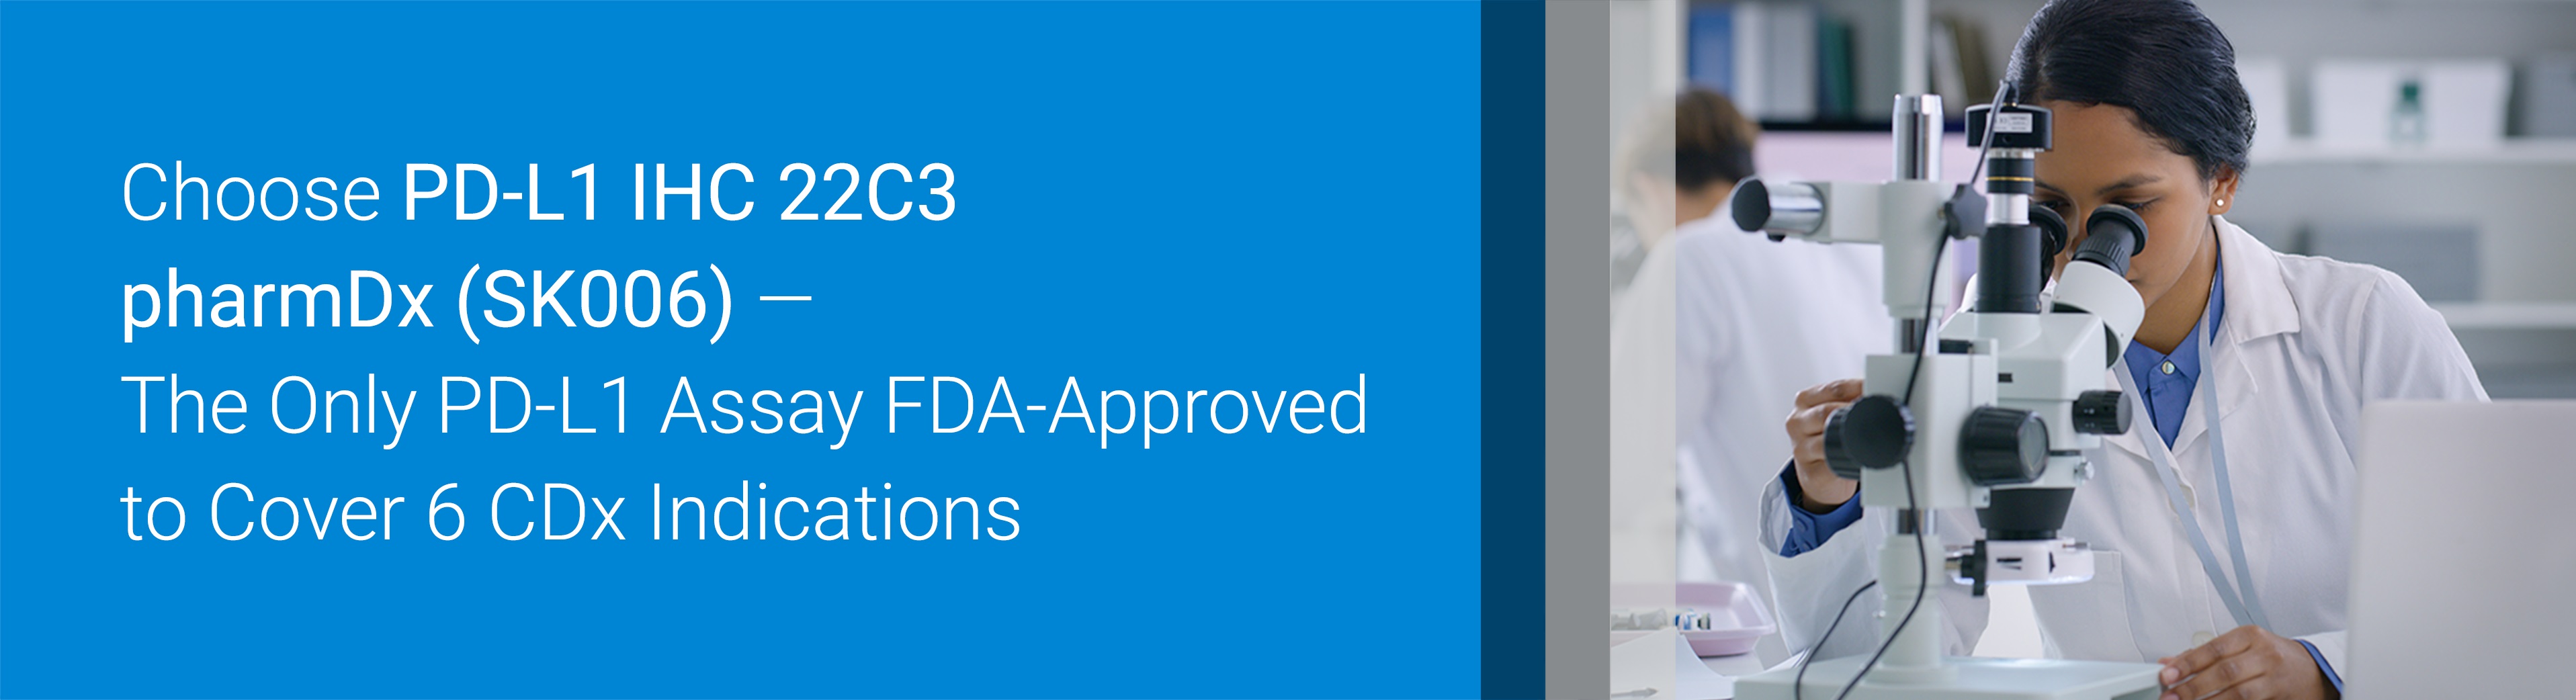 Choose PD-L1 IHC 22C3 pharmDx (SK006) — The Only PD-L1 assay FDA-Approved to Cover 7 CDx Indications